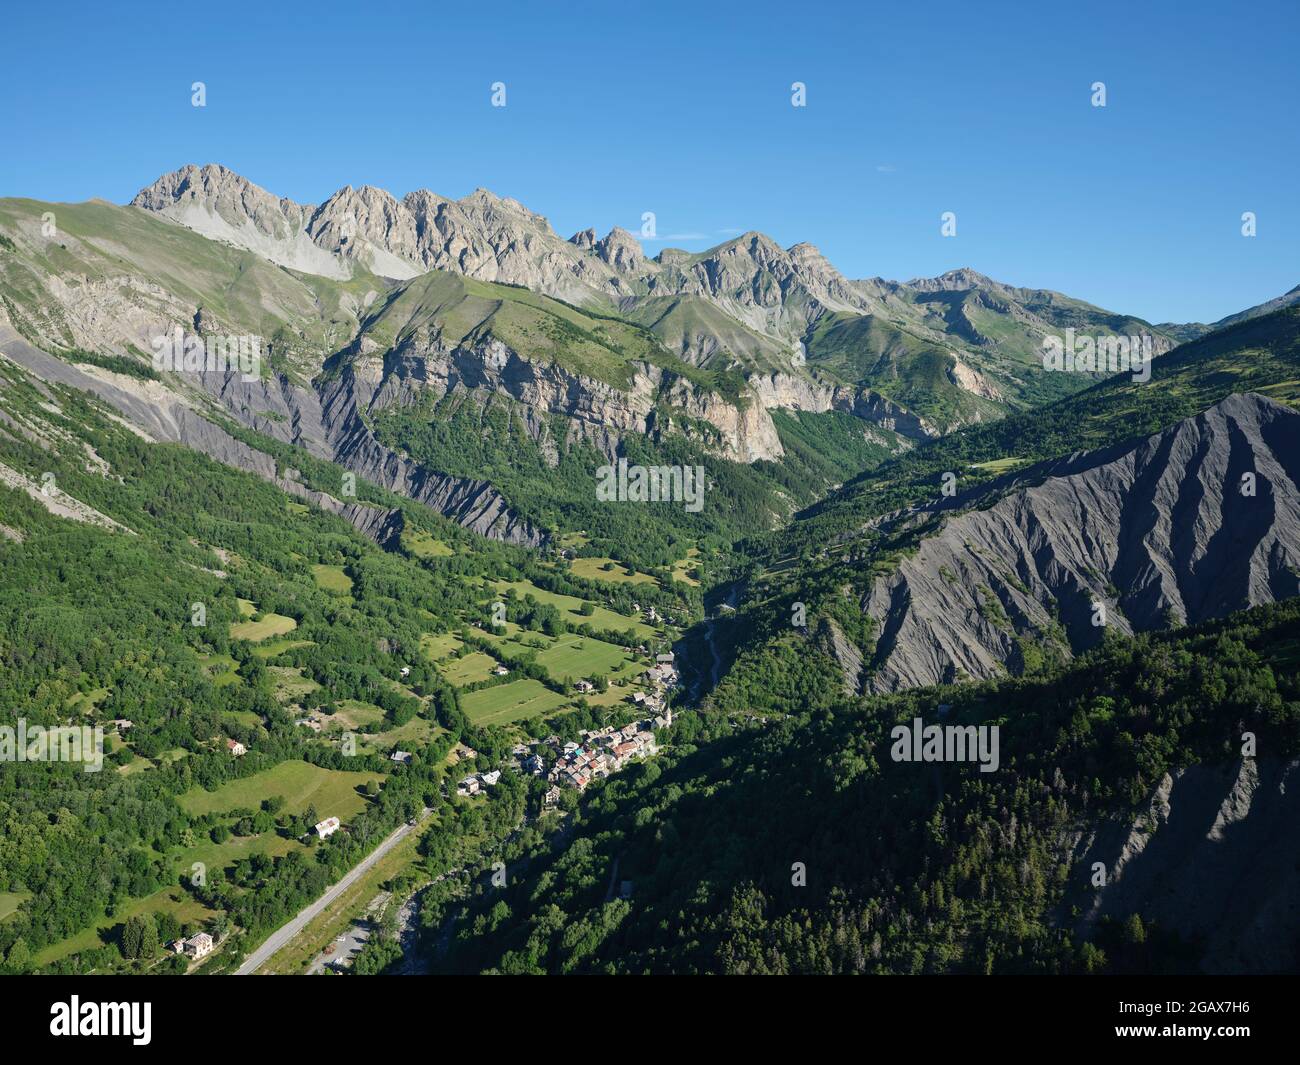 AERIAL VIEW. Wide angle view of the Upper Var Valley with the village of Entraunes; the gateway to the Mercantour Park. Alpes-Maritimes, France. Stock Photo